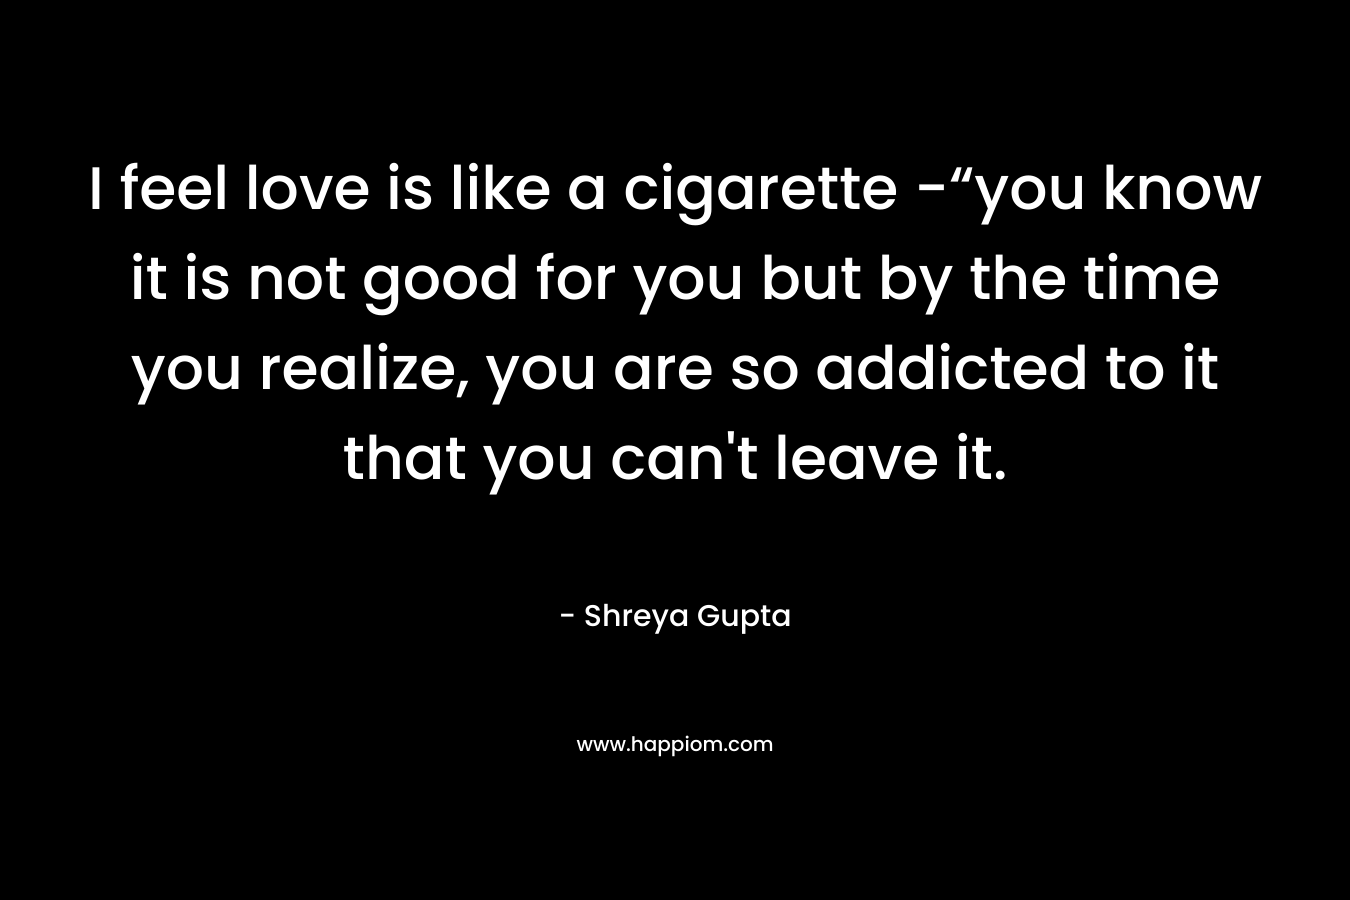 I feel love is like a cigarette -“you know it is not good for you but by the time you realize, you are so addicted to it that you can’t leave it. – Shreya Gupta